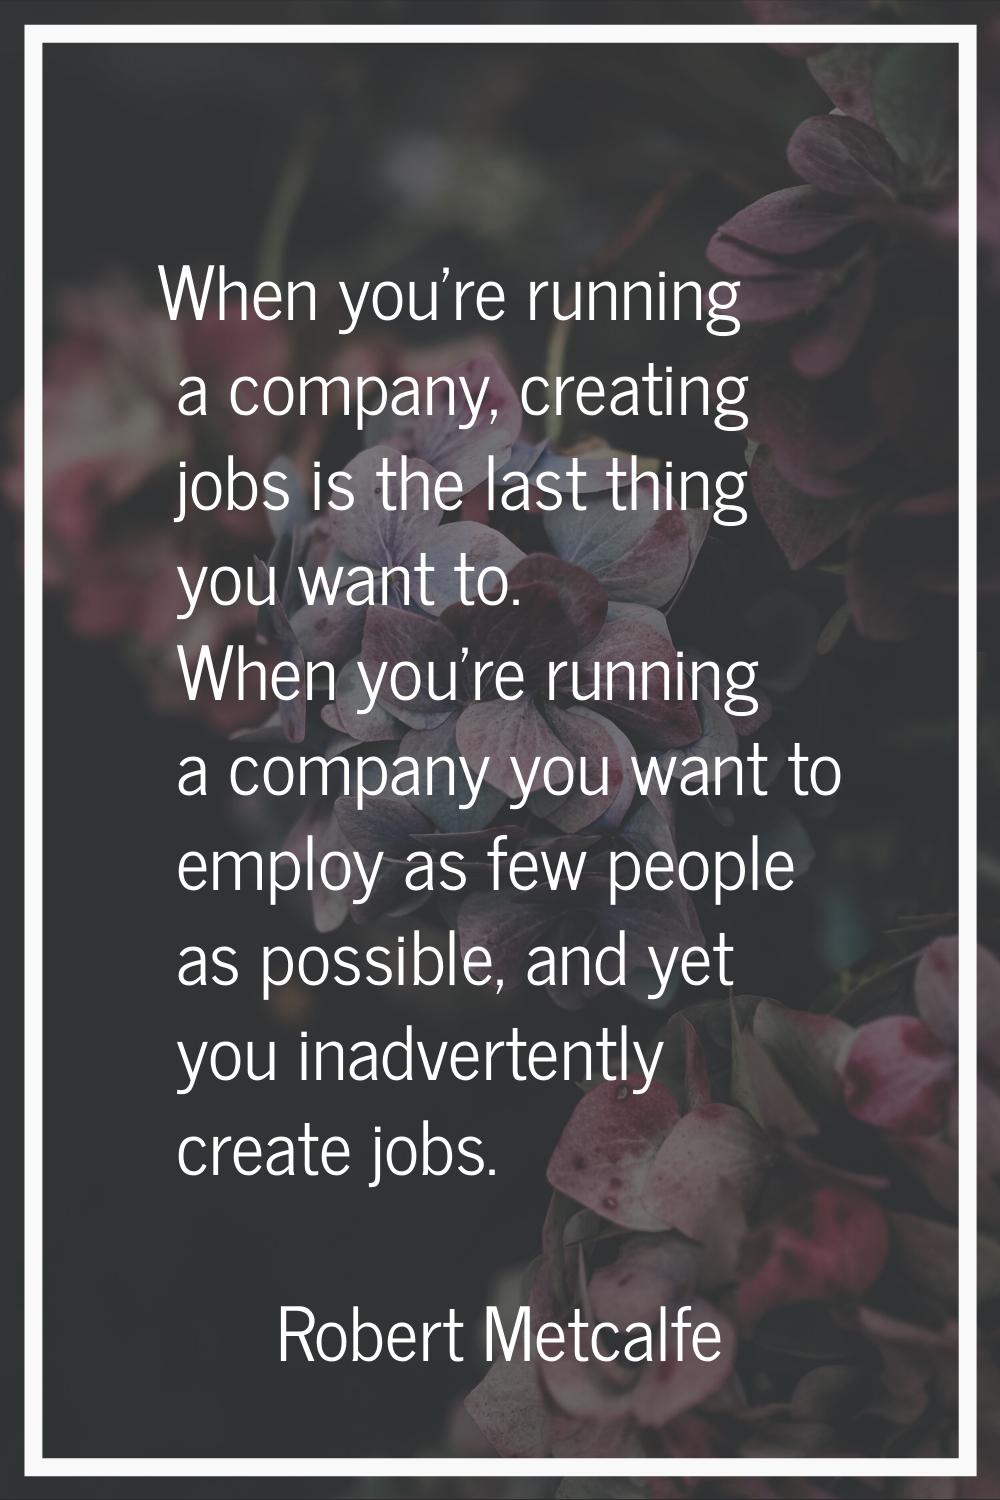 When you're running a company, creating jobs is the last thing you want to. When you're running a c